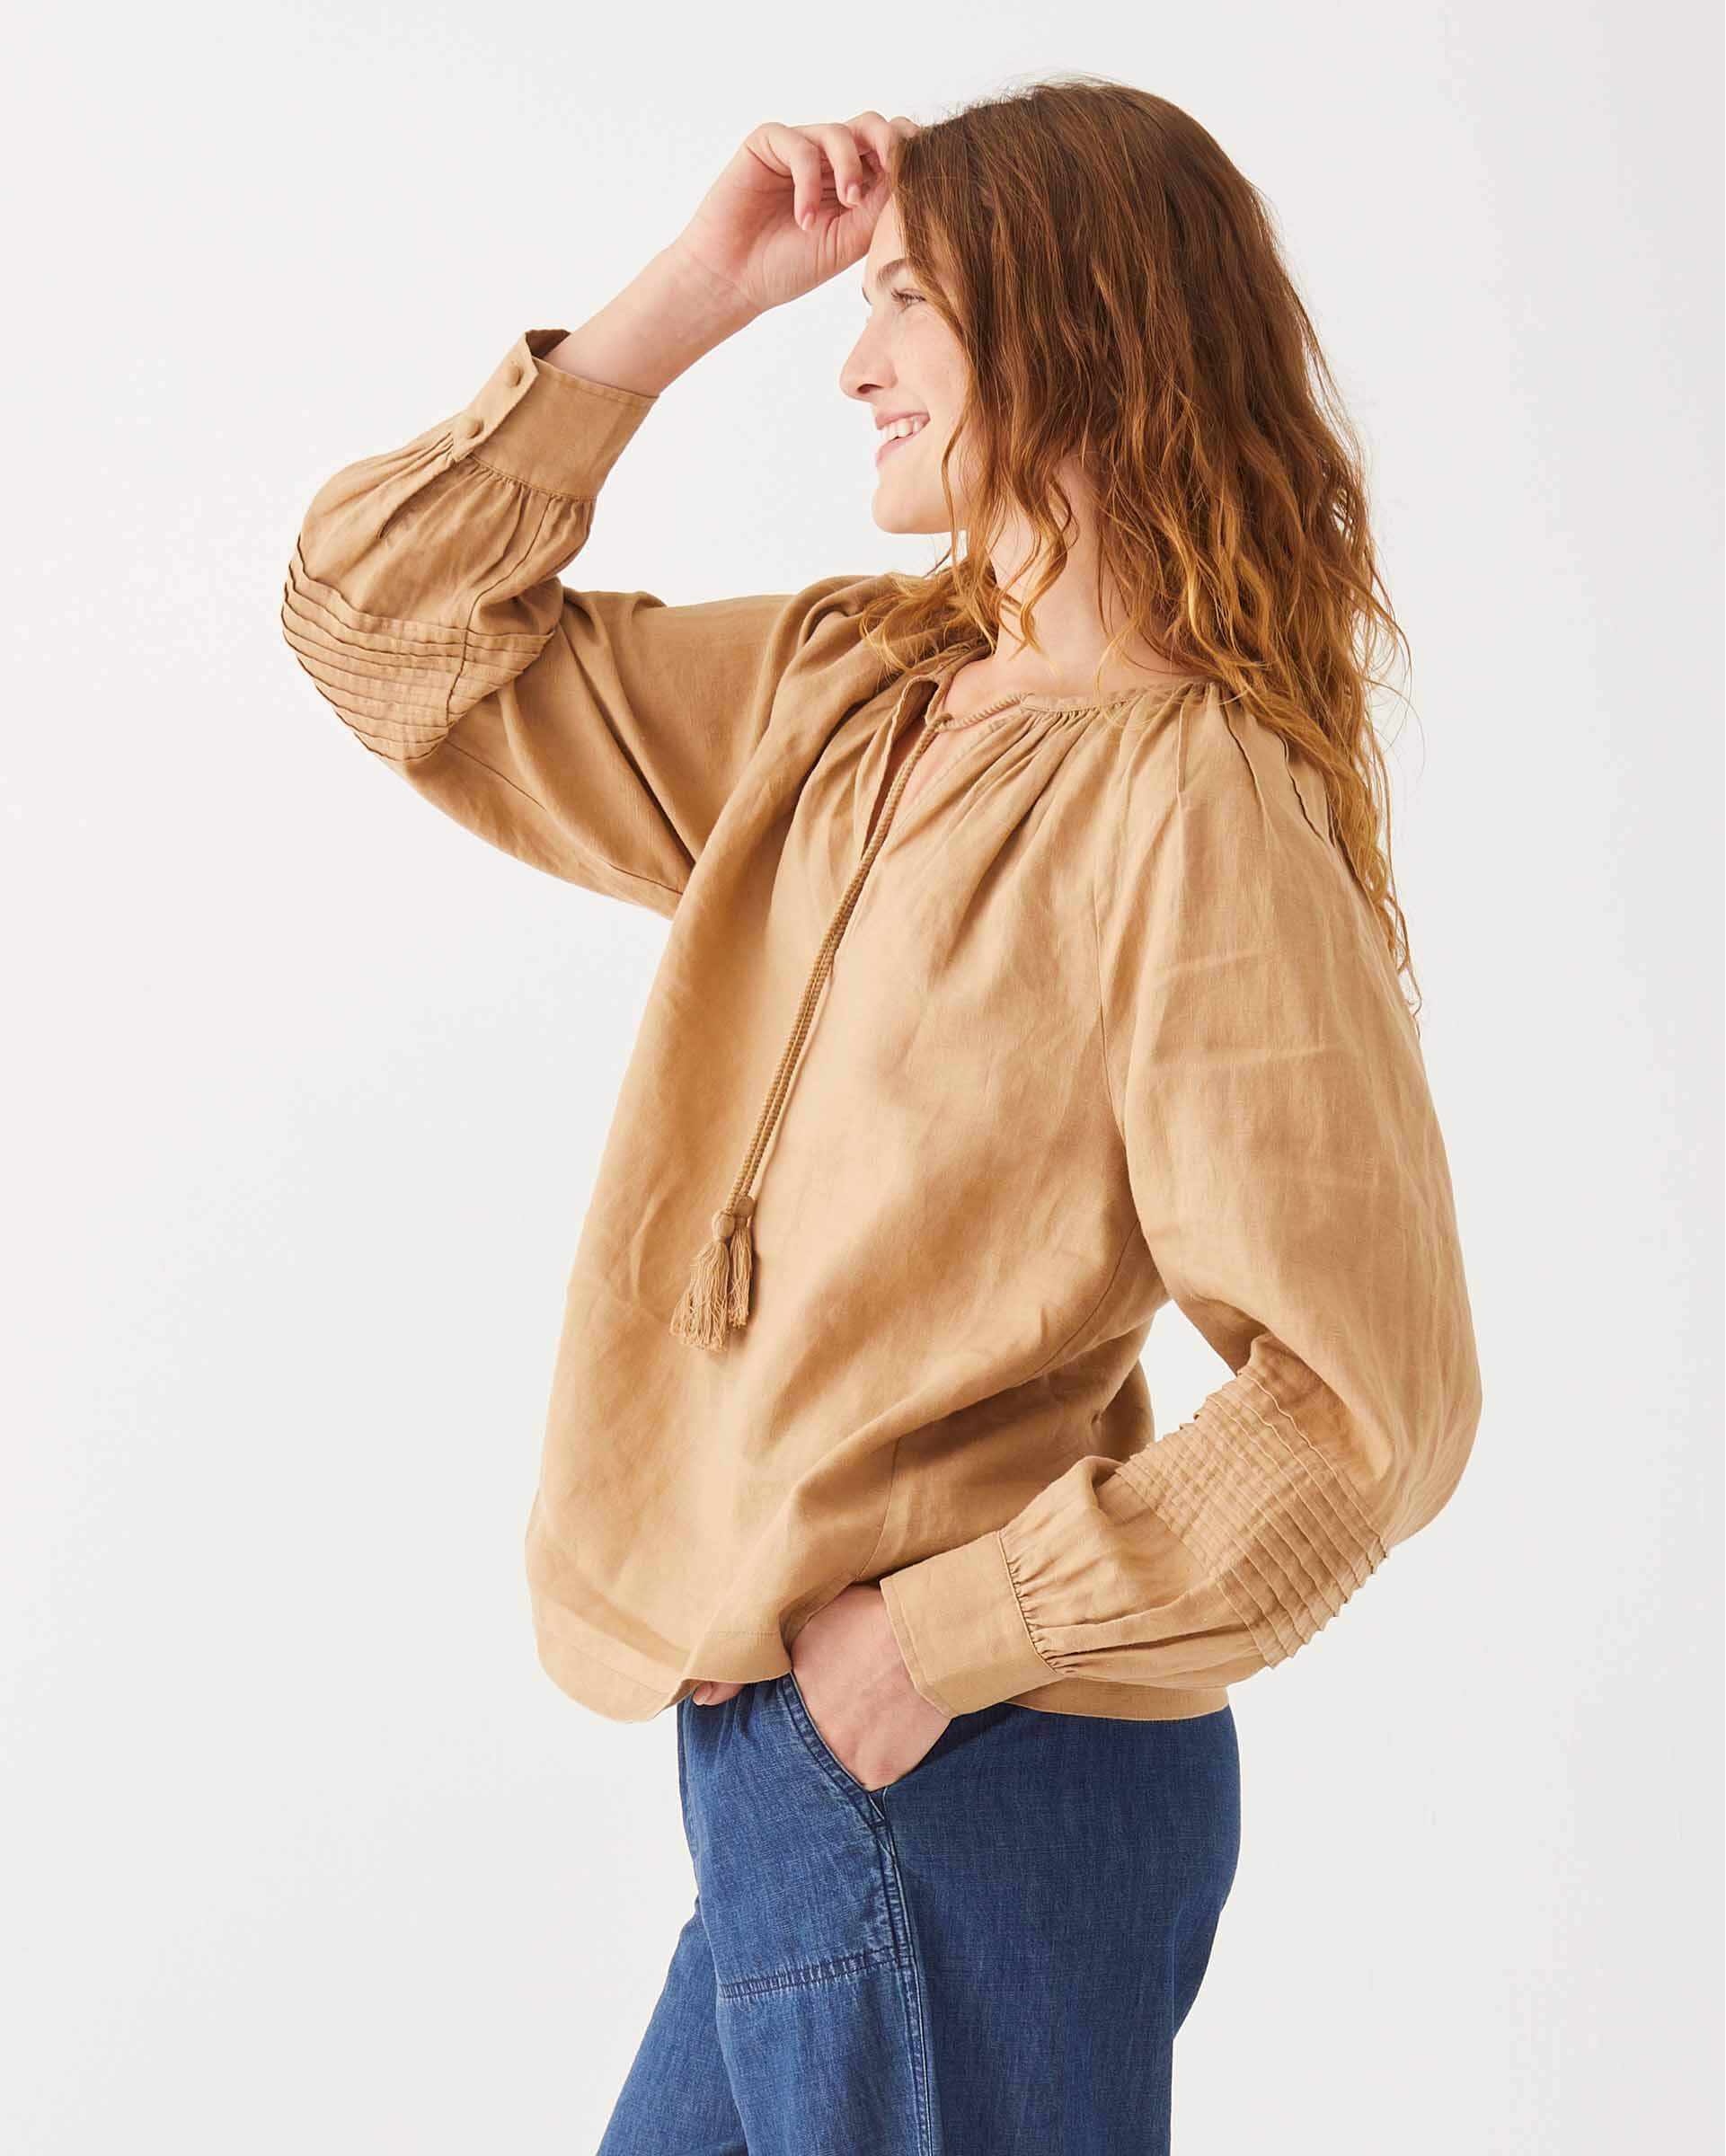 female wearing tan linen blouse with v-neck, tassels, and side slits sideways on a white background